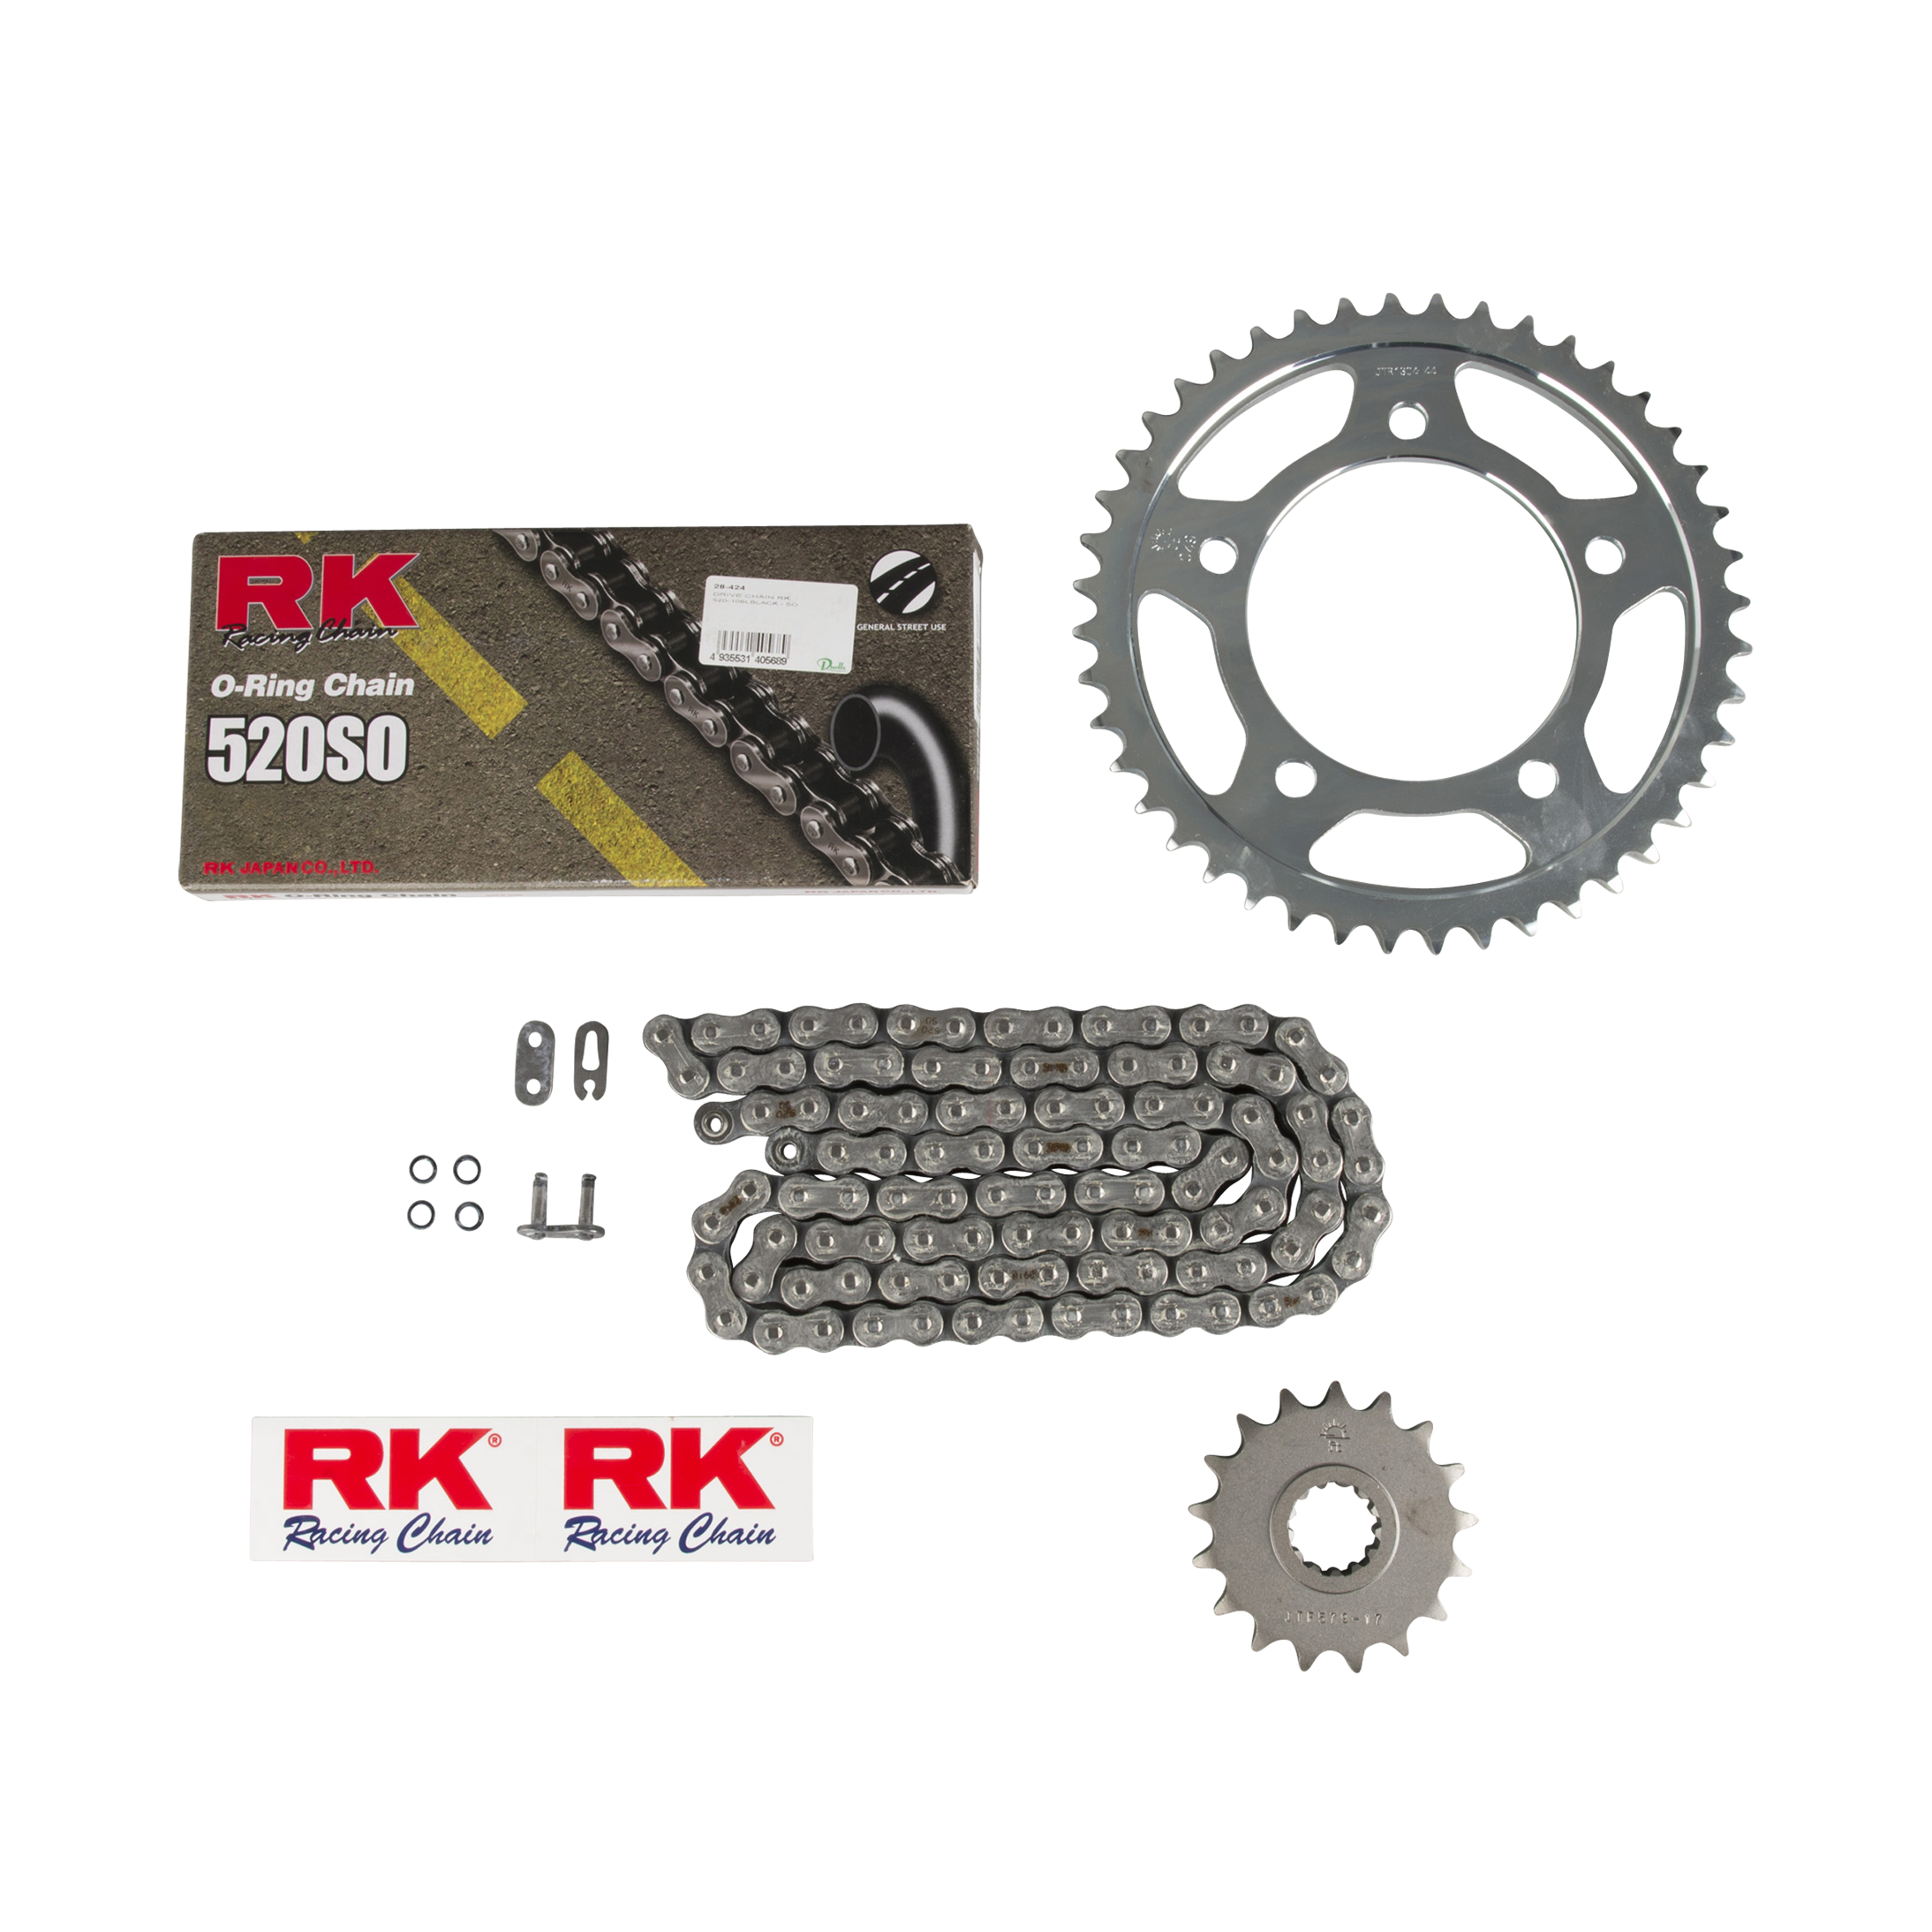 JT and RK 520SO O-Ring Chain and Sprocket Kit - Lowest Price Guarantee